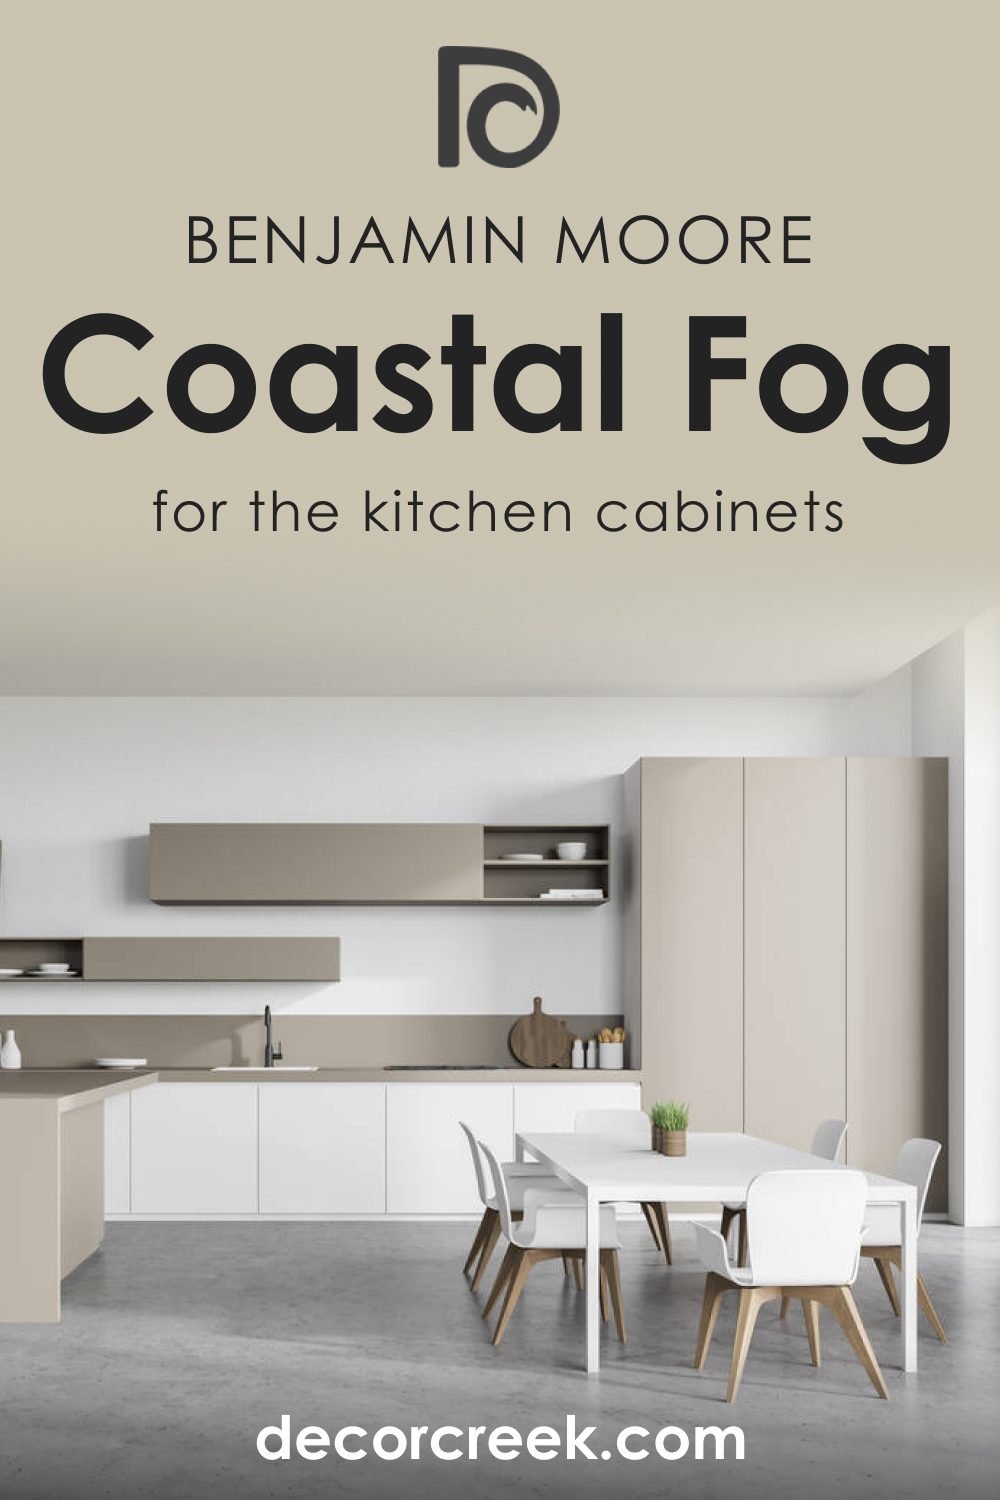 How to Use Coastal Fog AC-1 on the Kitchen Cabinets?